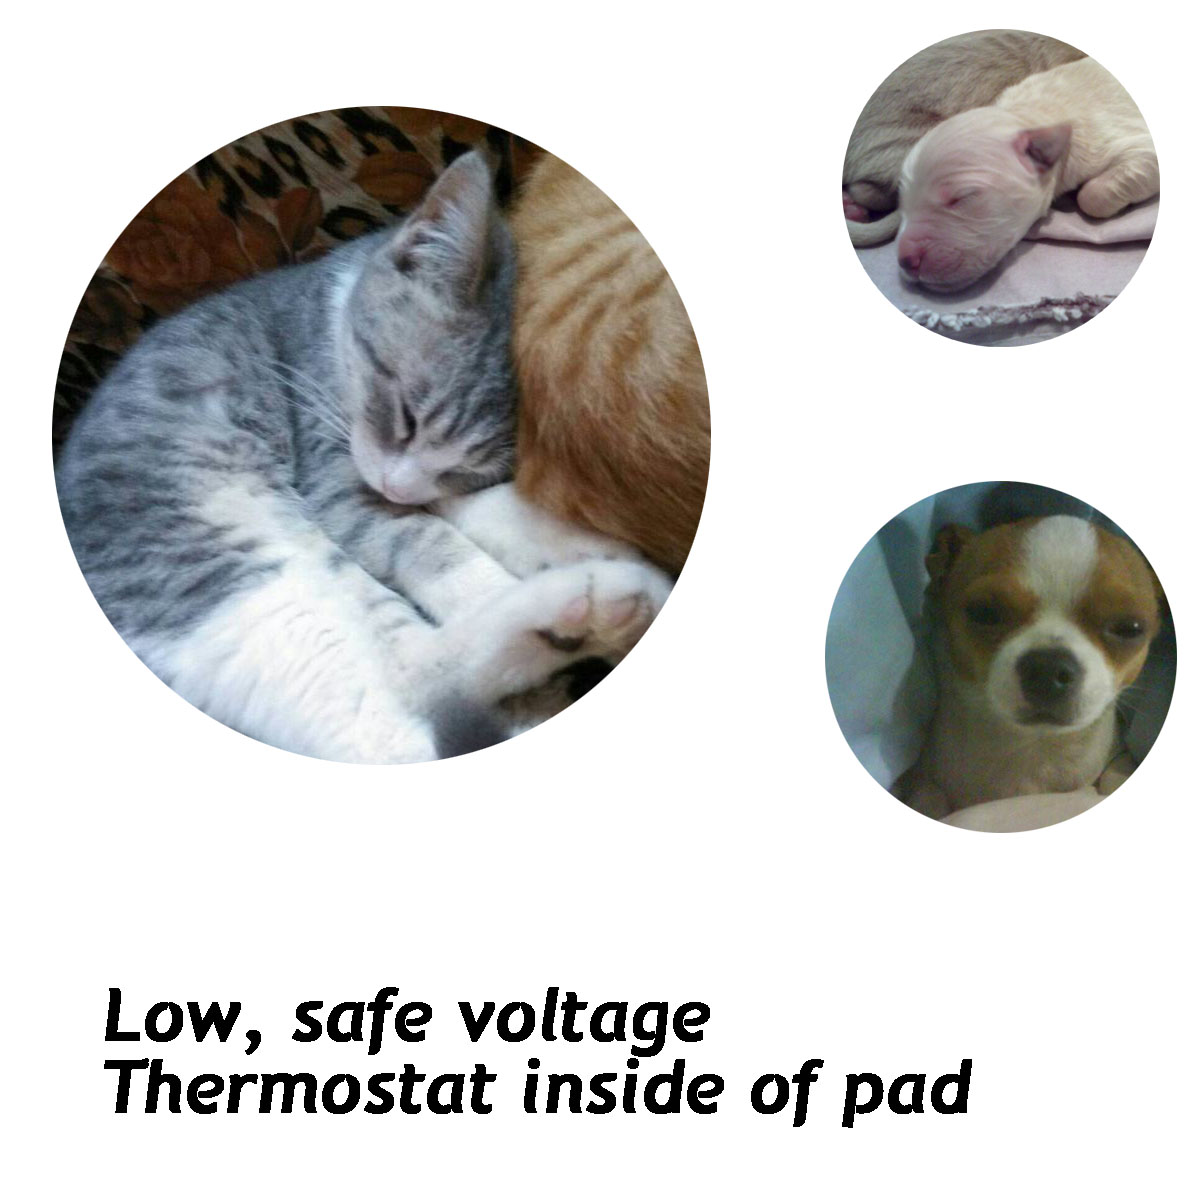 12V-Pet-Heat-Pad-Sotical-Veamor-Electric-Heating-Pad-for-Cats-and-Dogs-Waterproof-Warming-Mat-1239342-4